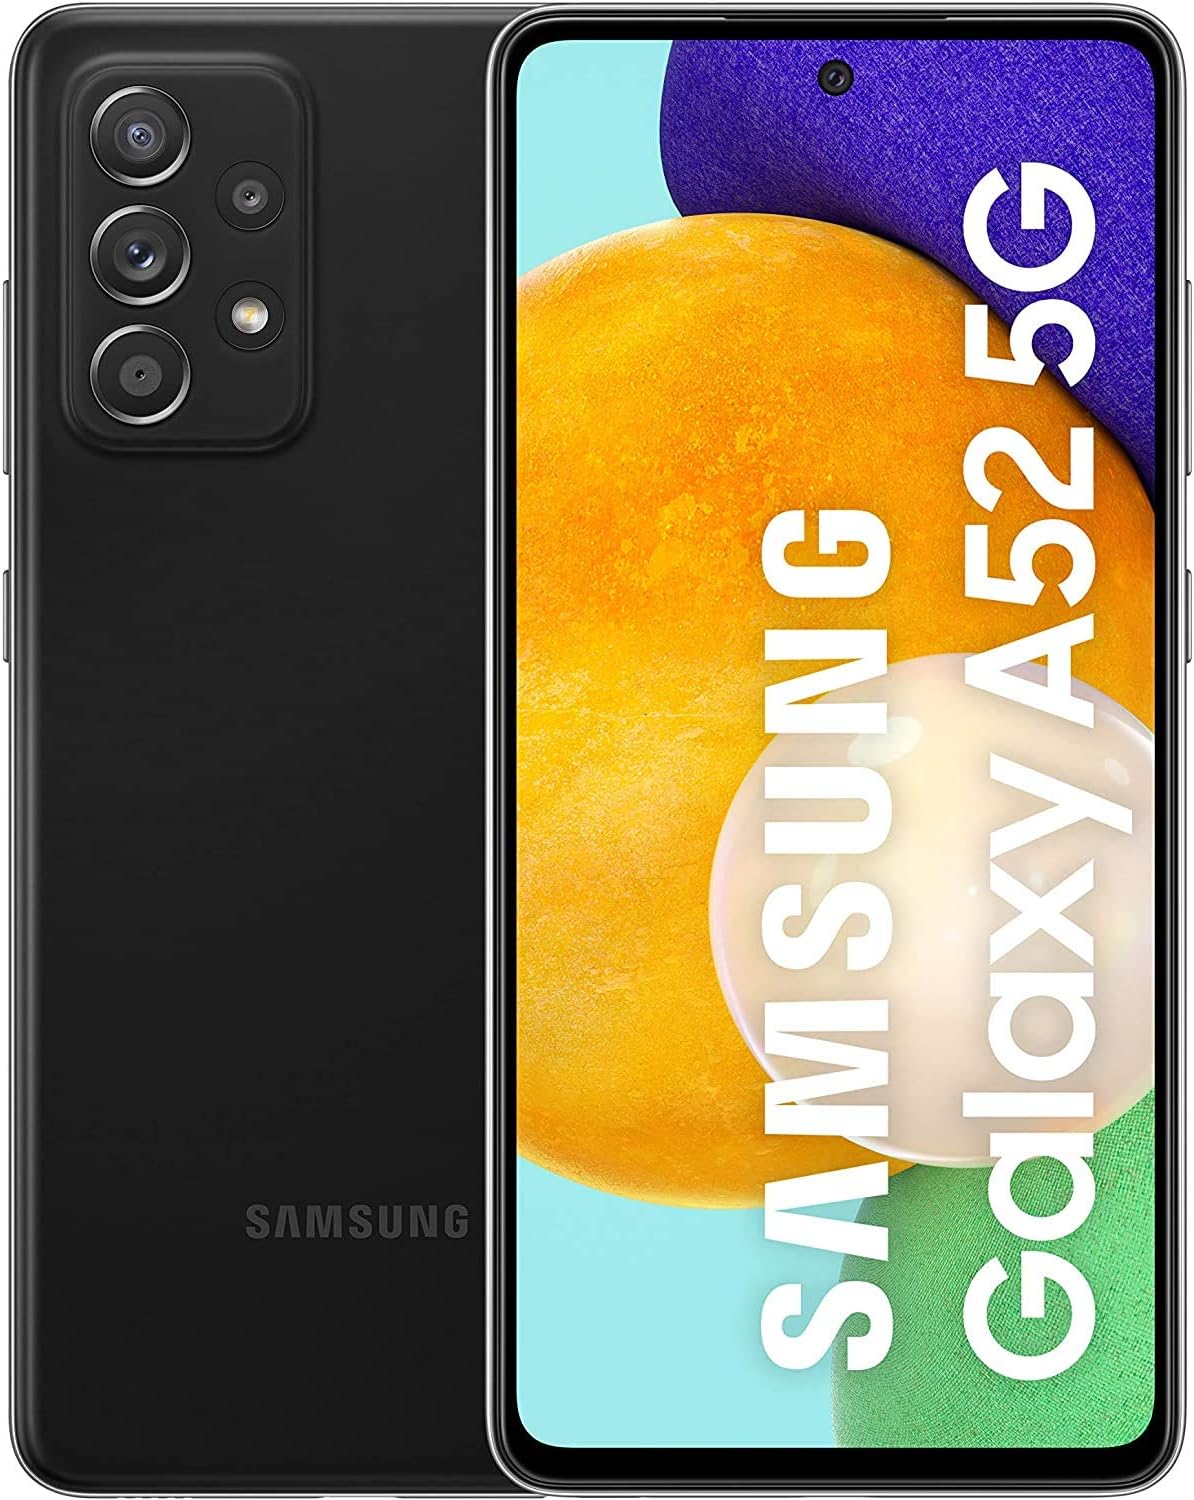 Samsung Galaxy A52 all carriers, 128GB, 5G Smartphone Dual SIM Android Mobile Phone Awesome Black (UK Version) (Renewed)   Import  Single ASIN  Import  Multiple ASIN ×Product customization General Description Gallery Reviews Variatio - Amazing Gadgets Outlet